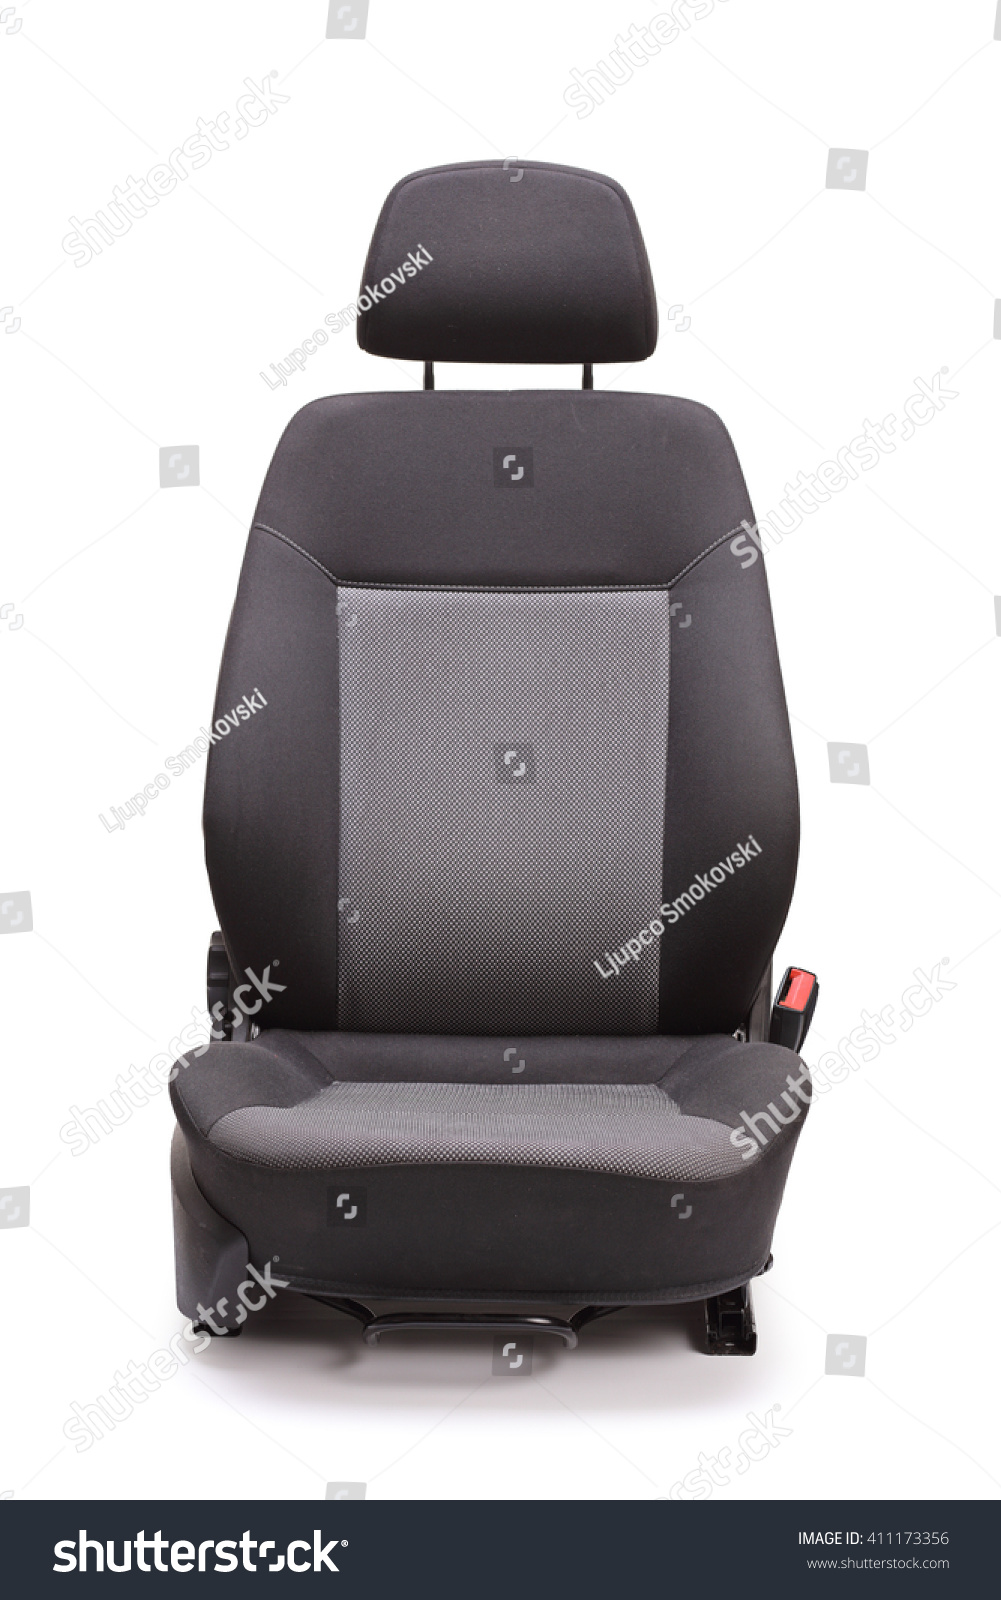 Vertical studio shot of a brand new black car seat isolated on white background #411173356